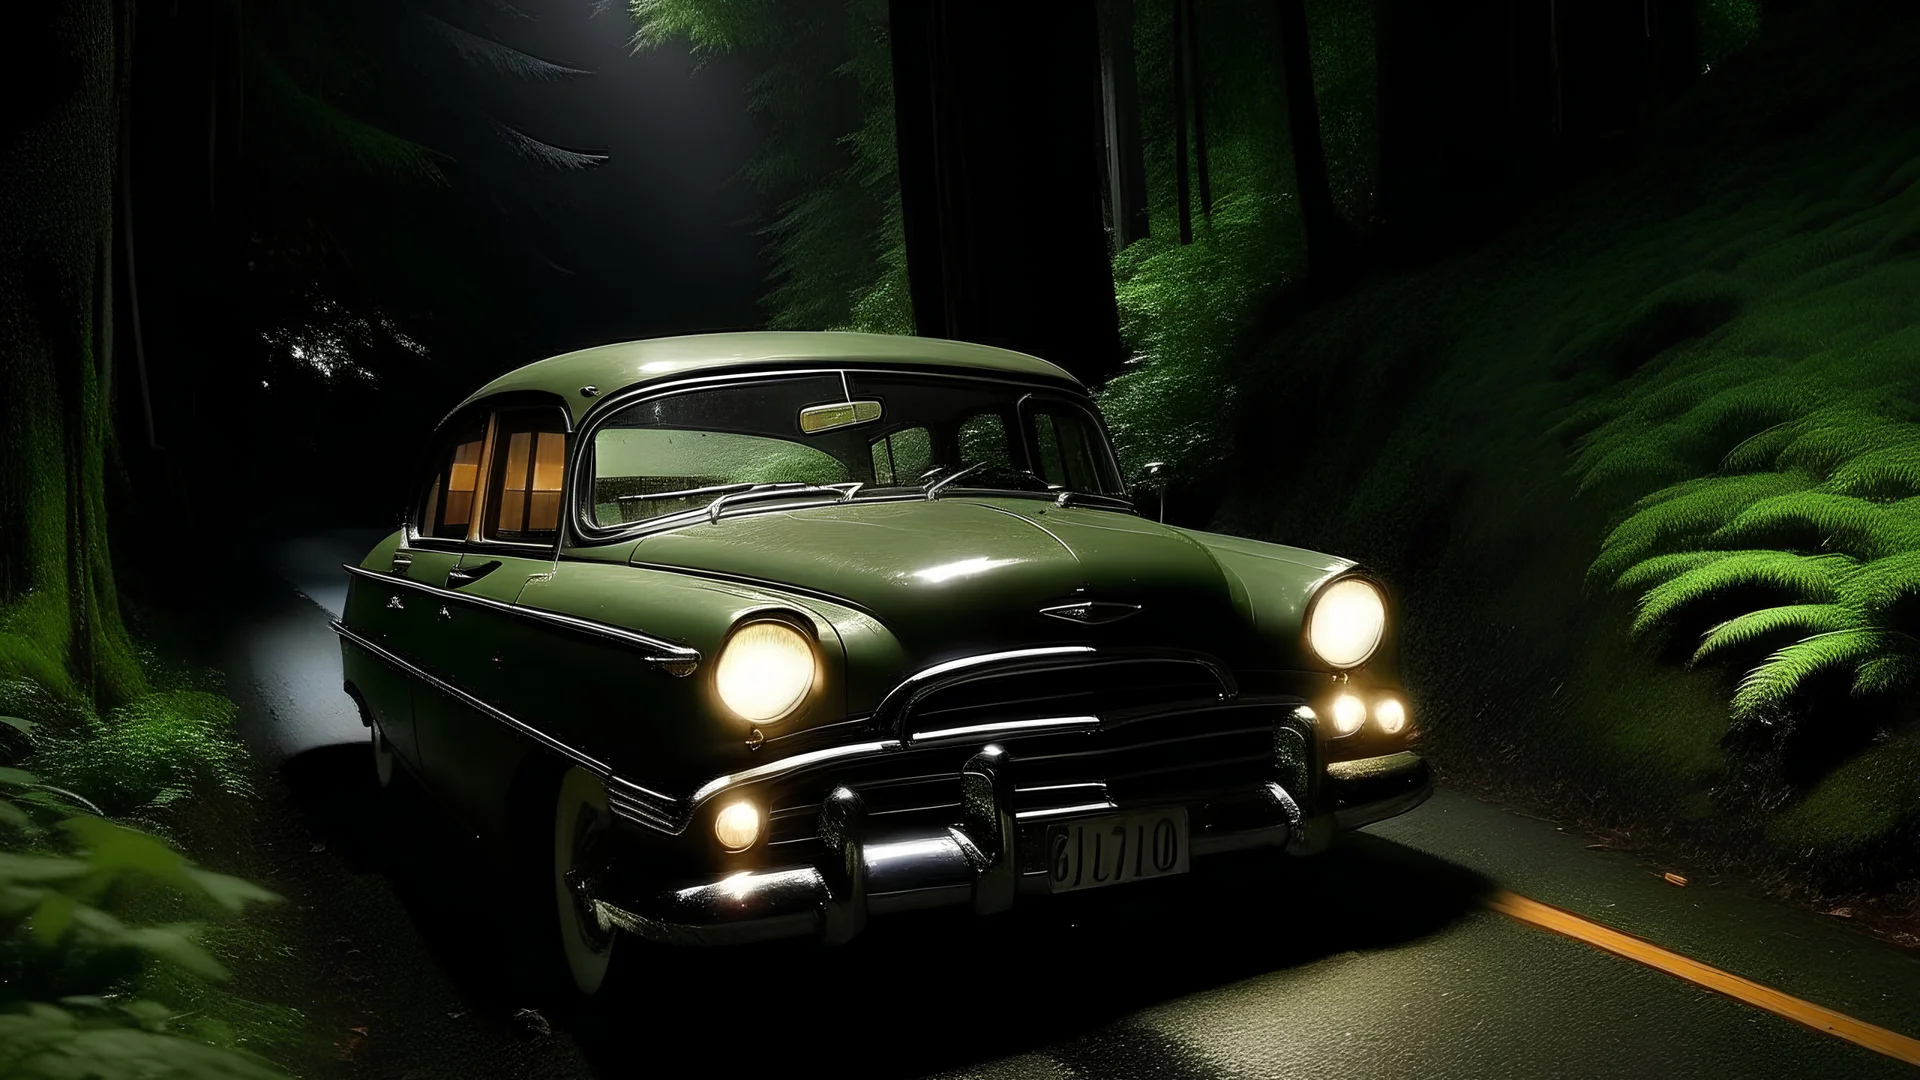 My friend, Sam, driving an old Helios, was driving his old car down a forested road at night.